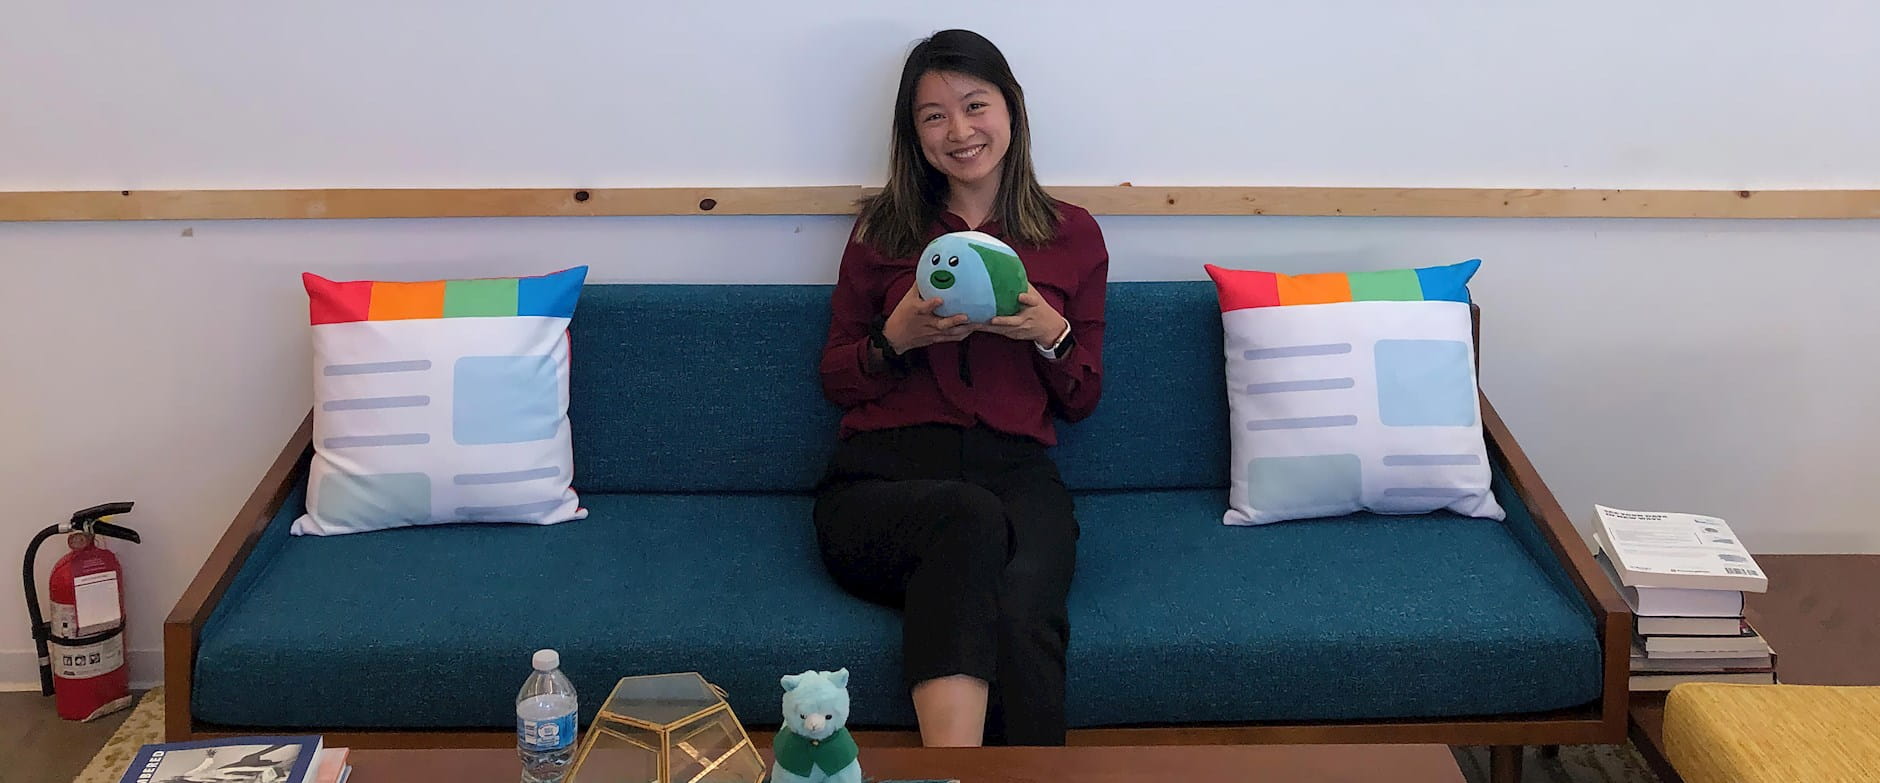 Helen Wu posing on a couch at SmartNews